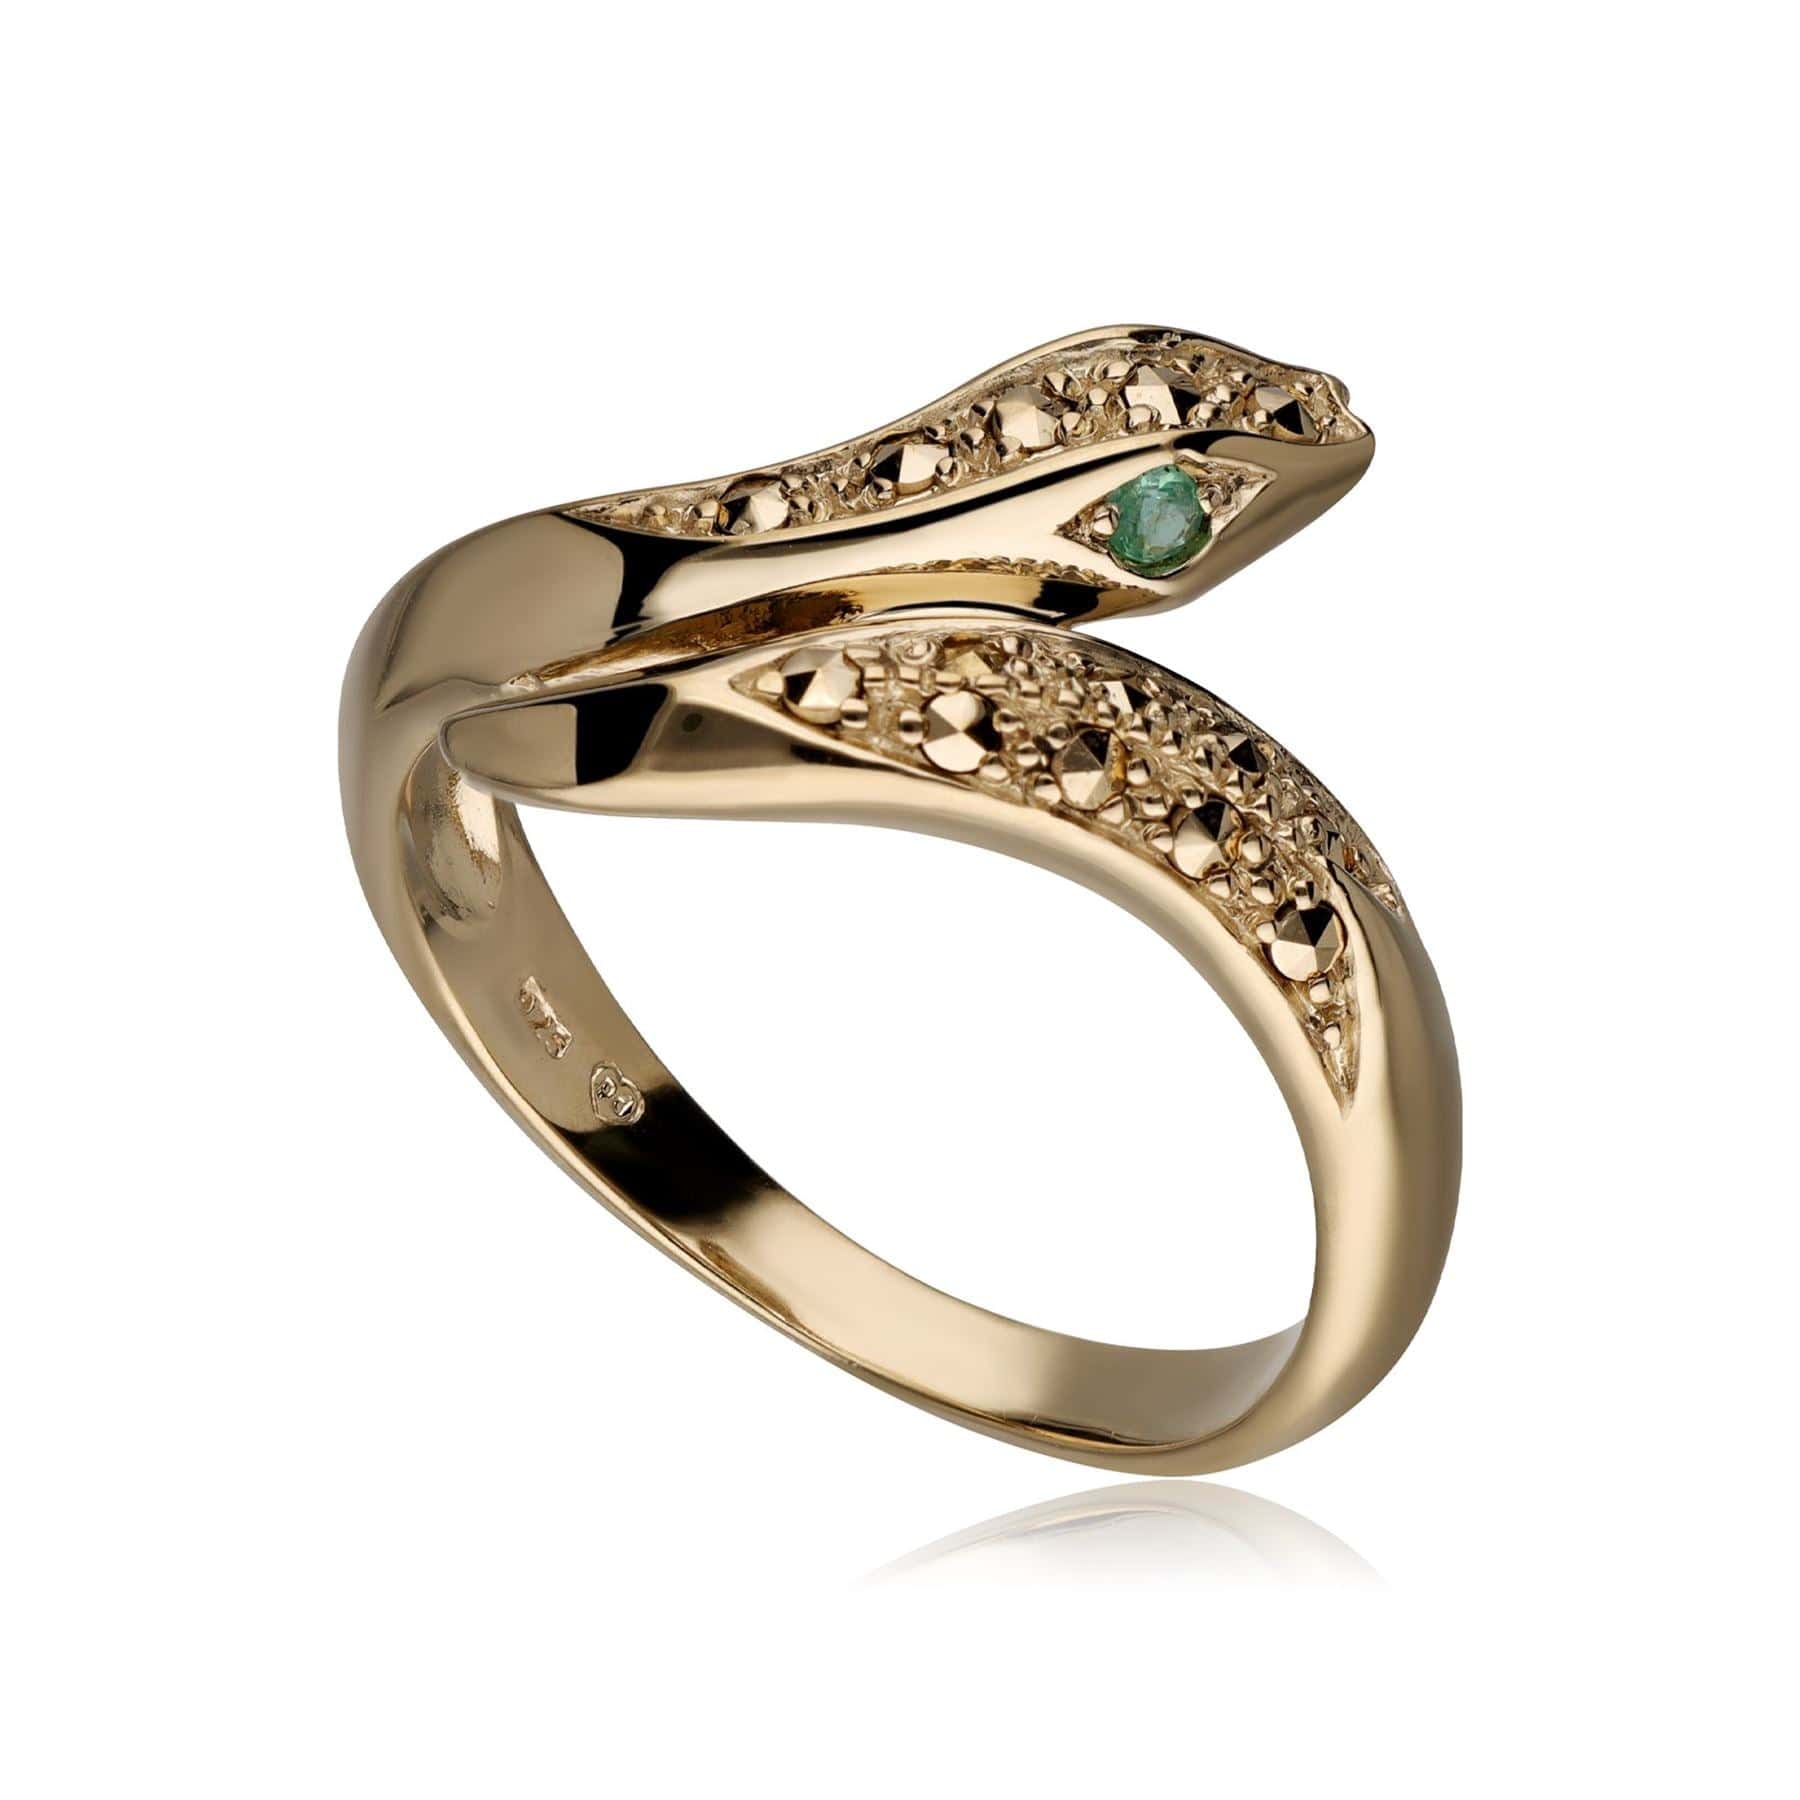 Emerald Eye Marcasite Snake Ring in Gold Plated Sterling Silver - Gemondo